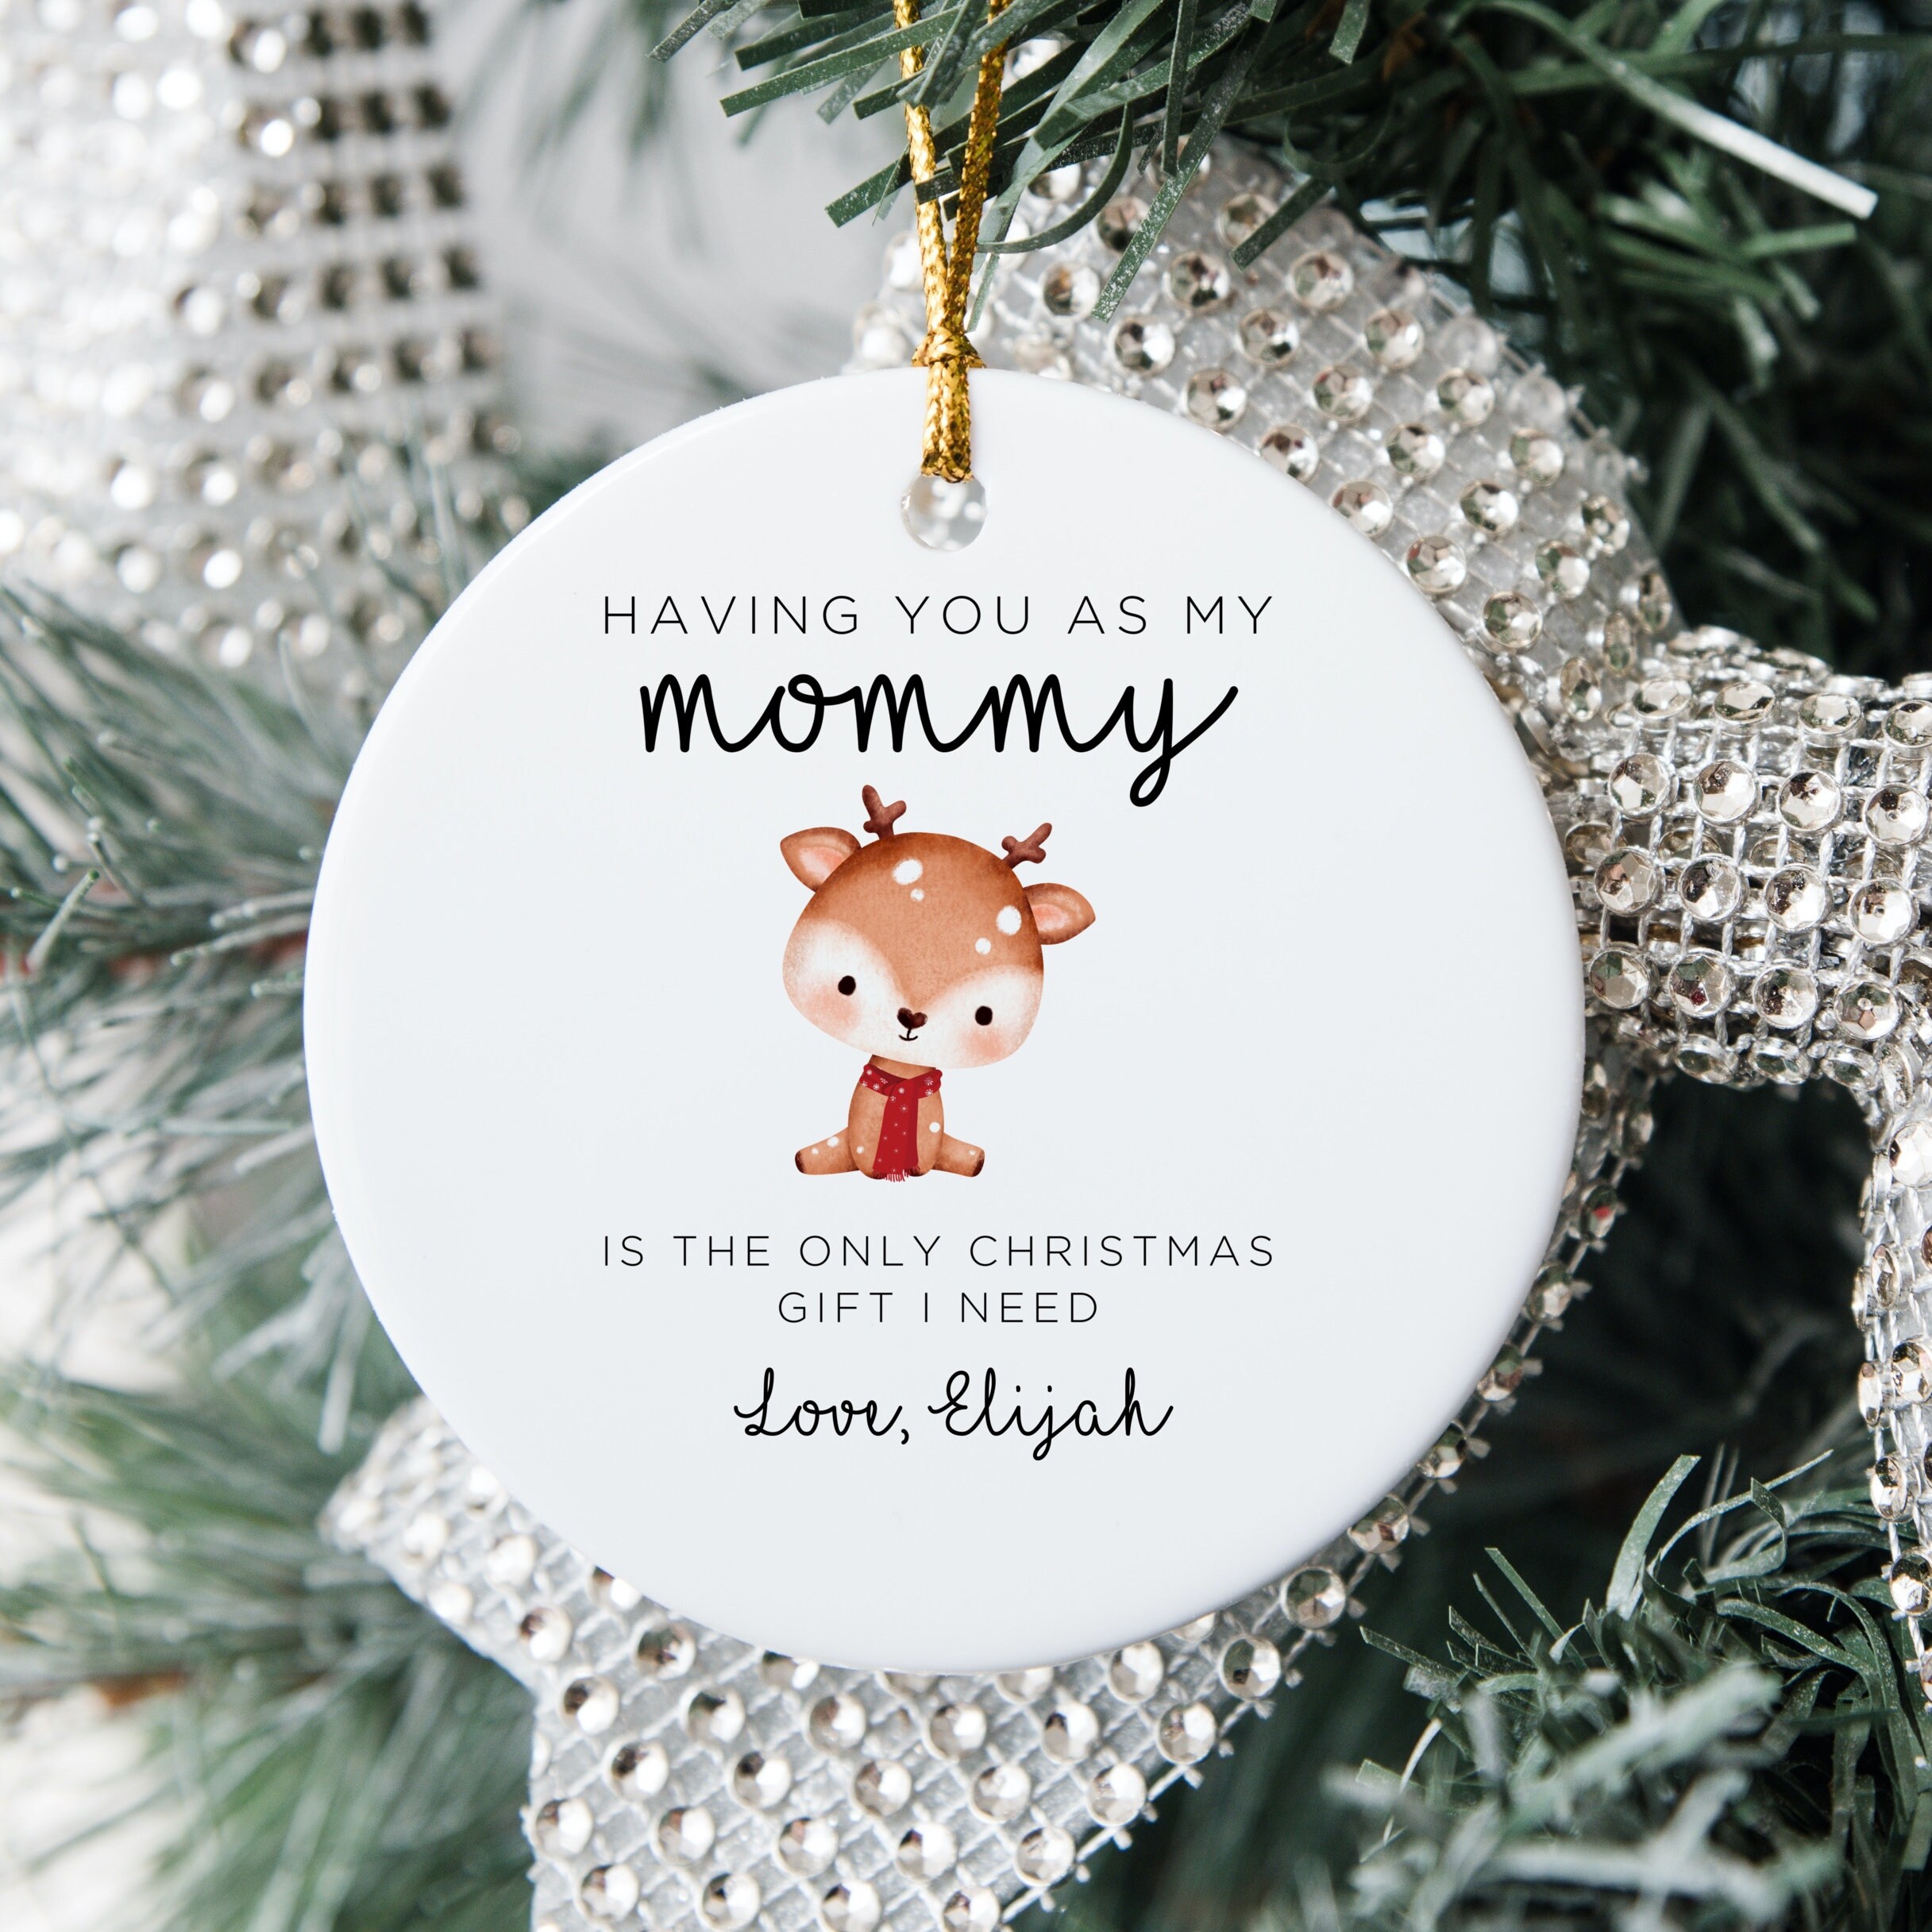 Christmas Gifts for Mom from Daughter, Son, Kids - Ideas Gifts for Mom on  Christmas - Mom Birthday G…See more Christmas Gifts for Mom from Daughter